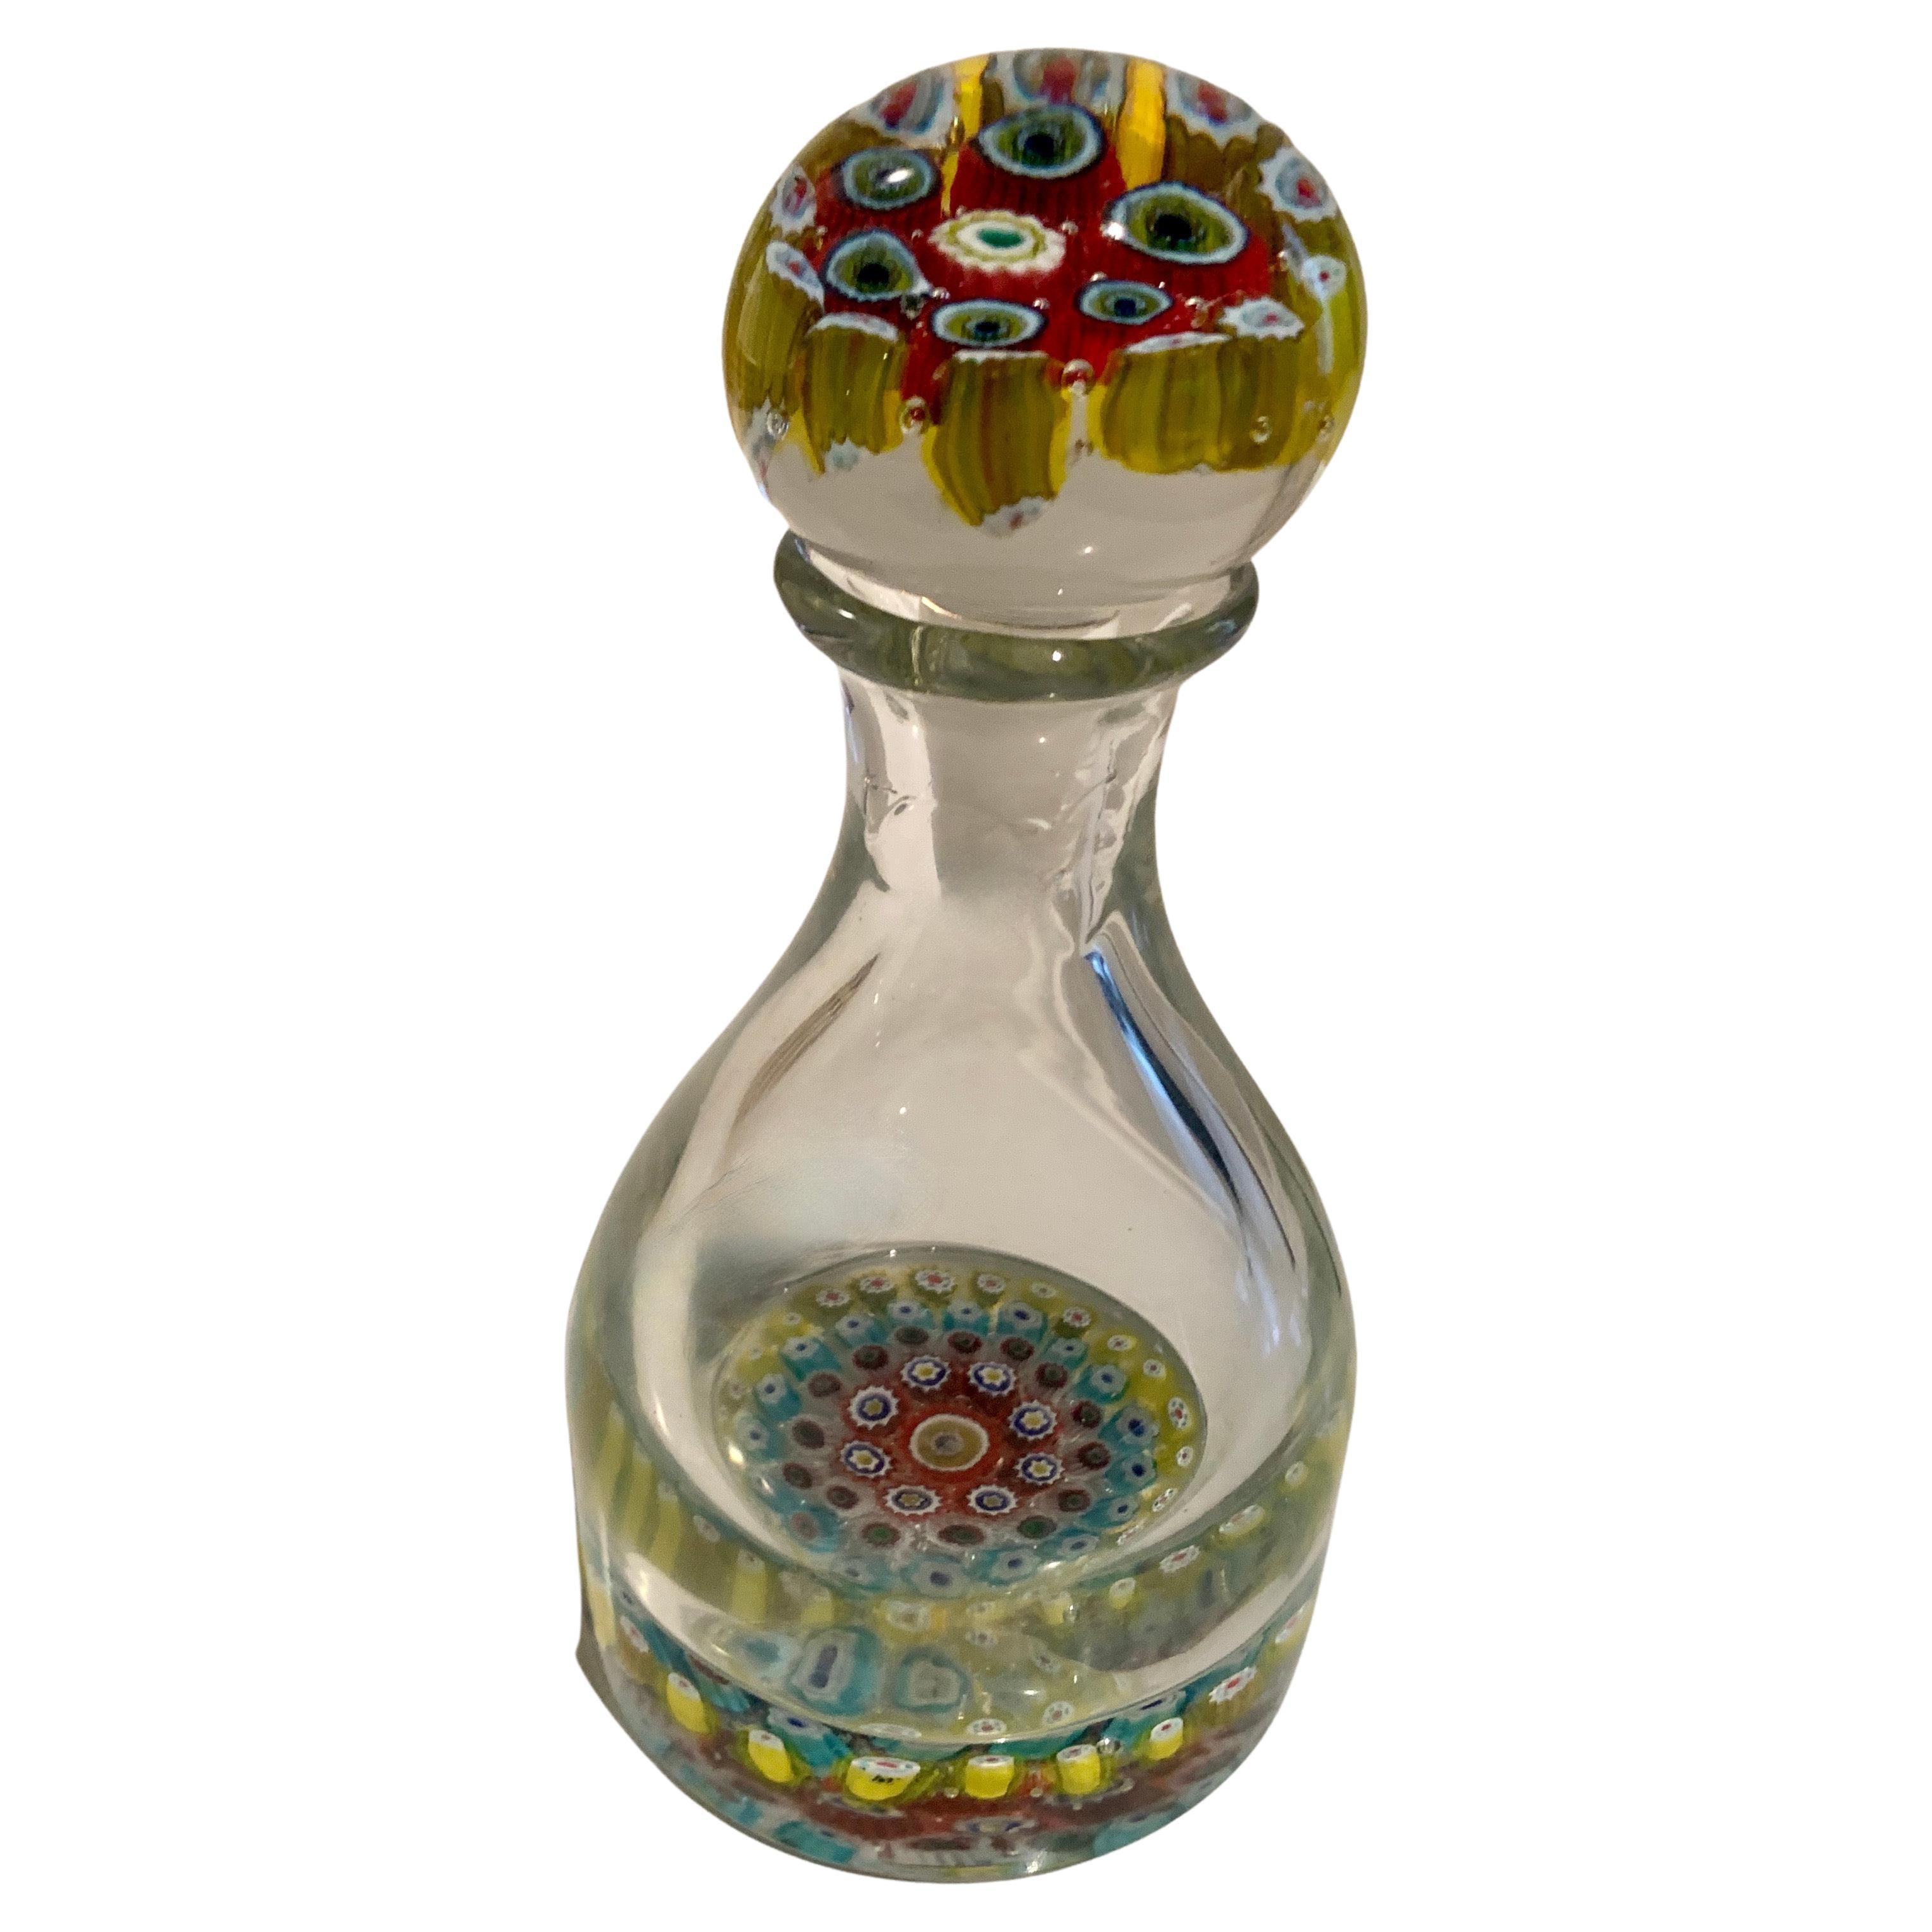 A Millefiori bottle. A wonderful hand crafted bottle with great color to the base and a complementary stopper. The bottle would work well for perfumes or as a decanter... hand blown and unique.